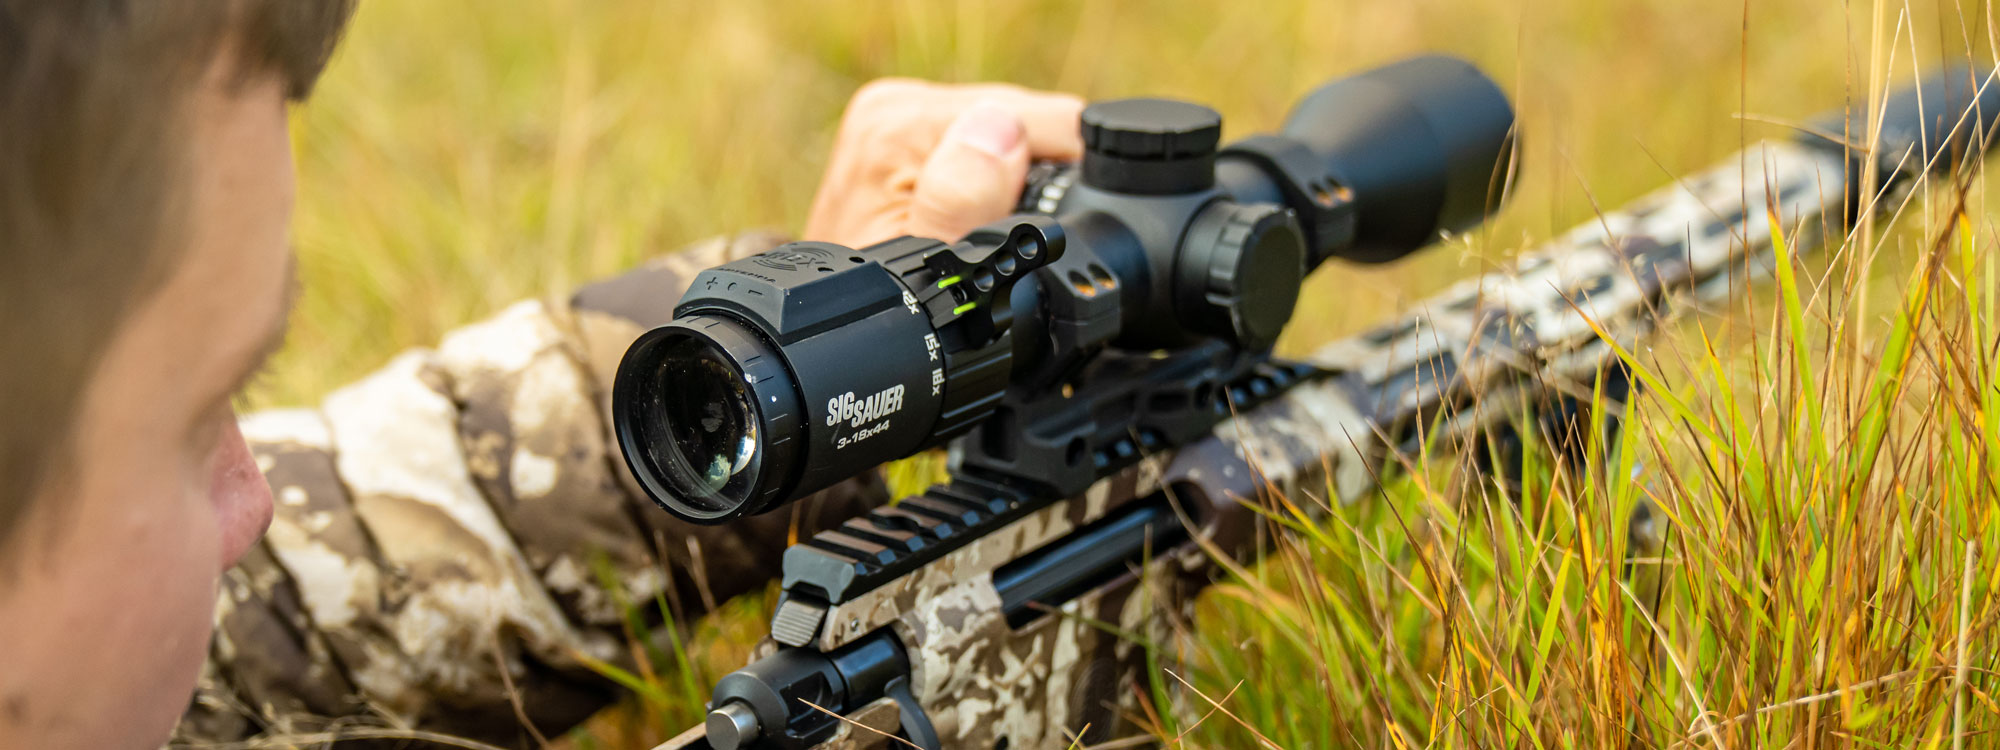 Red Dot Sight or Scope: What is the Best Optic for Your Rifle?